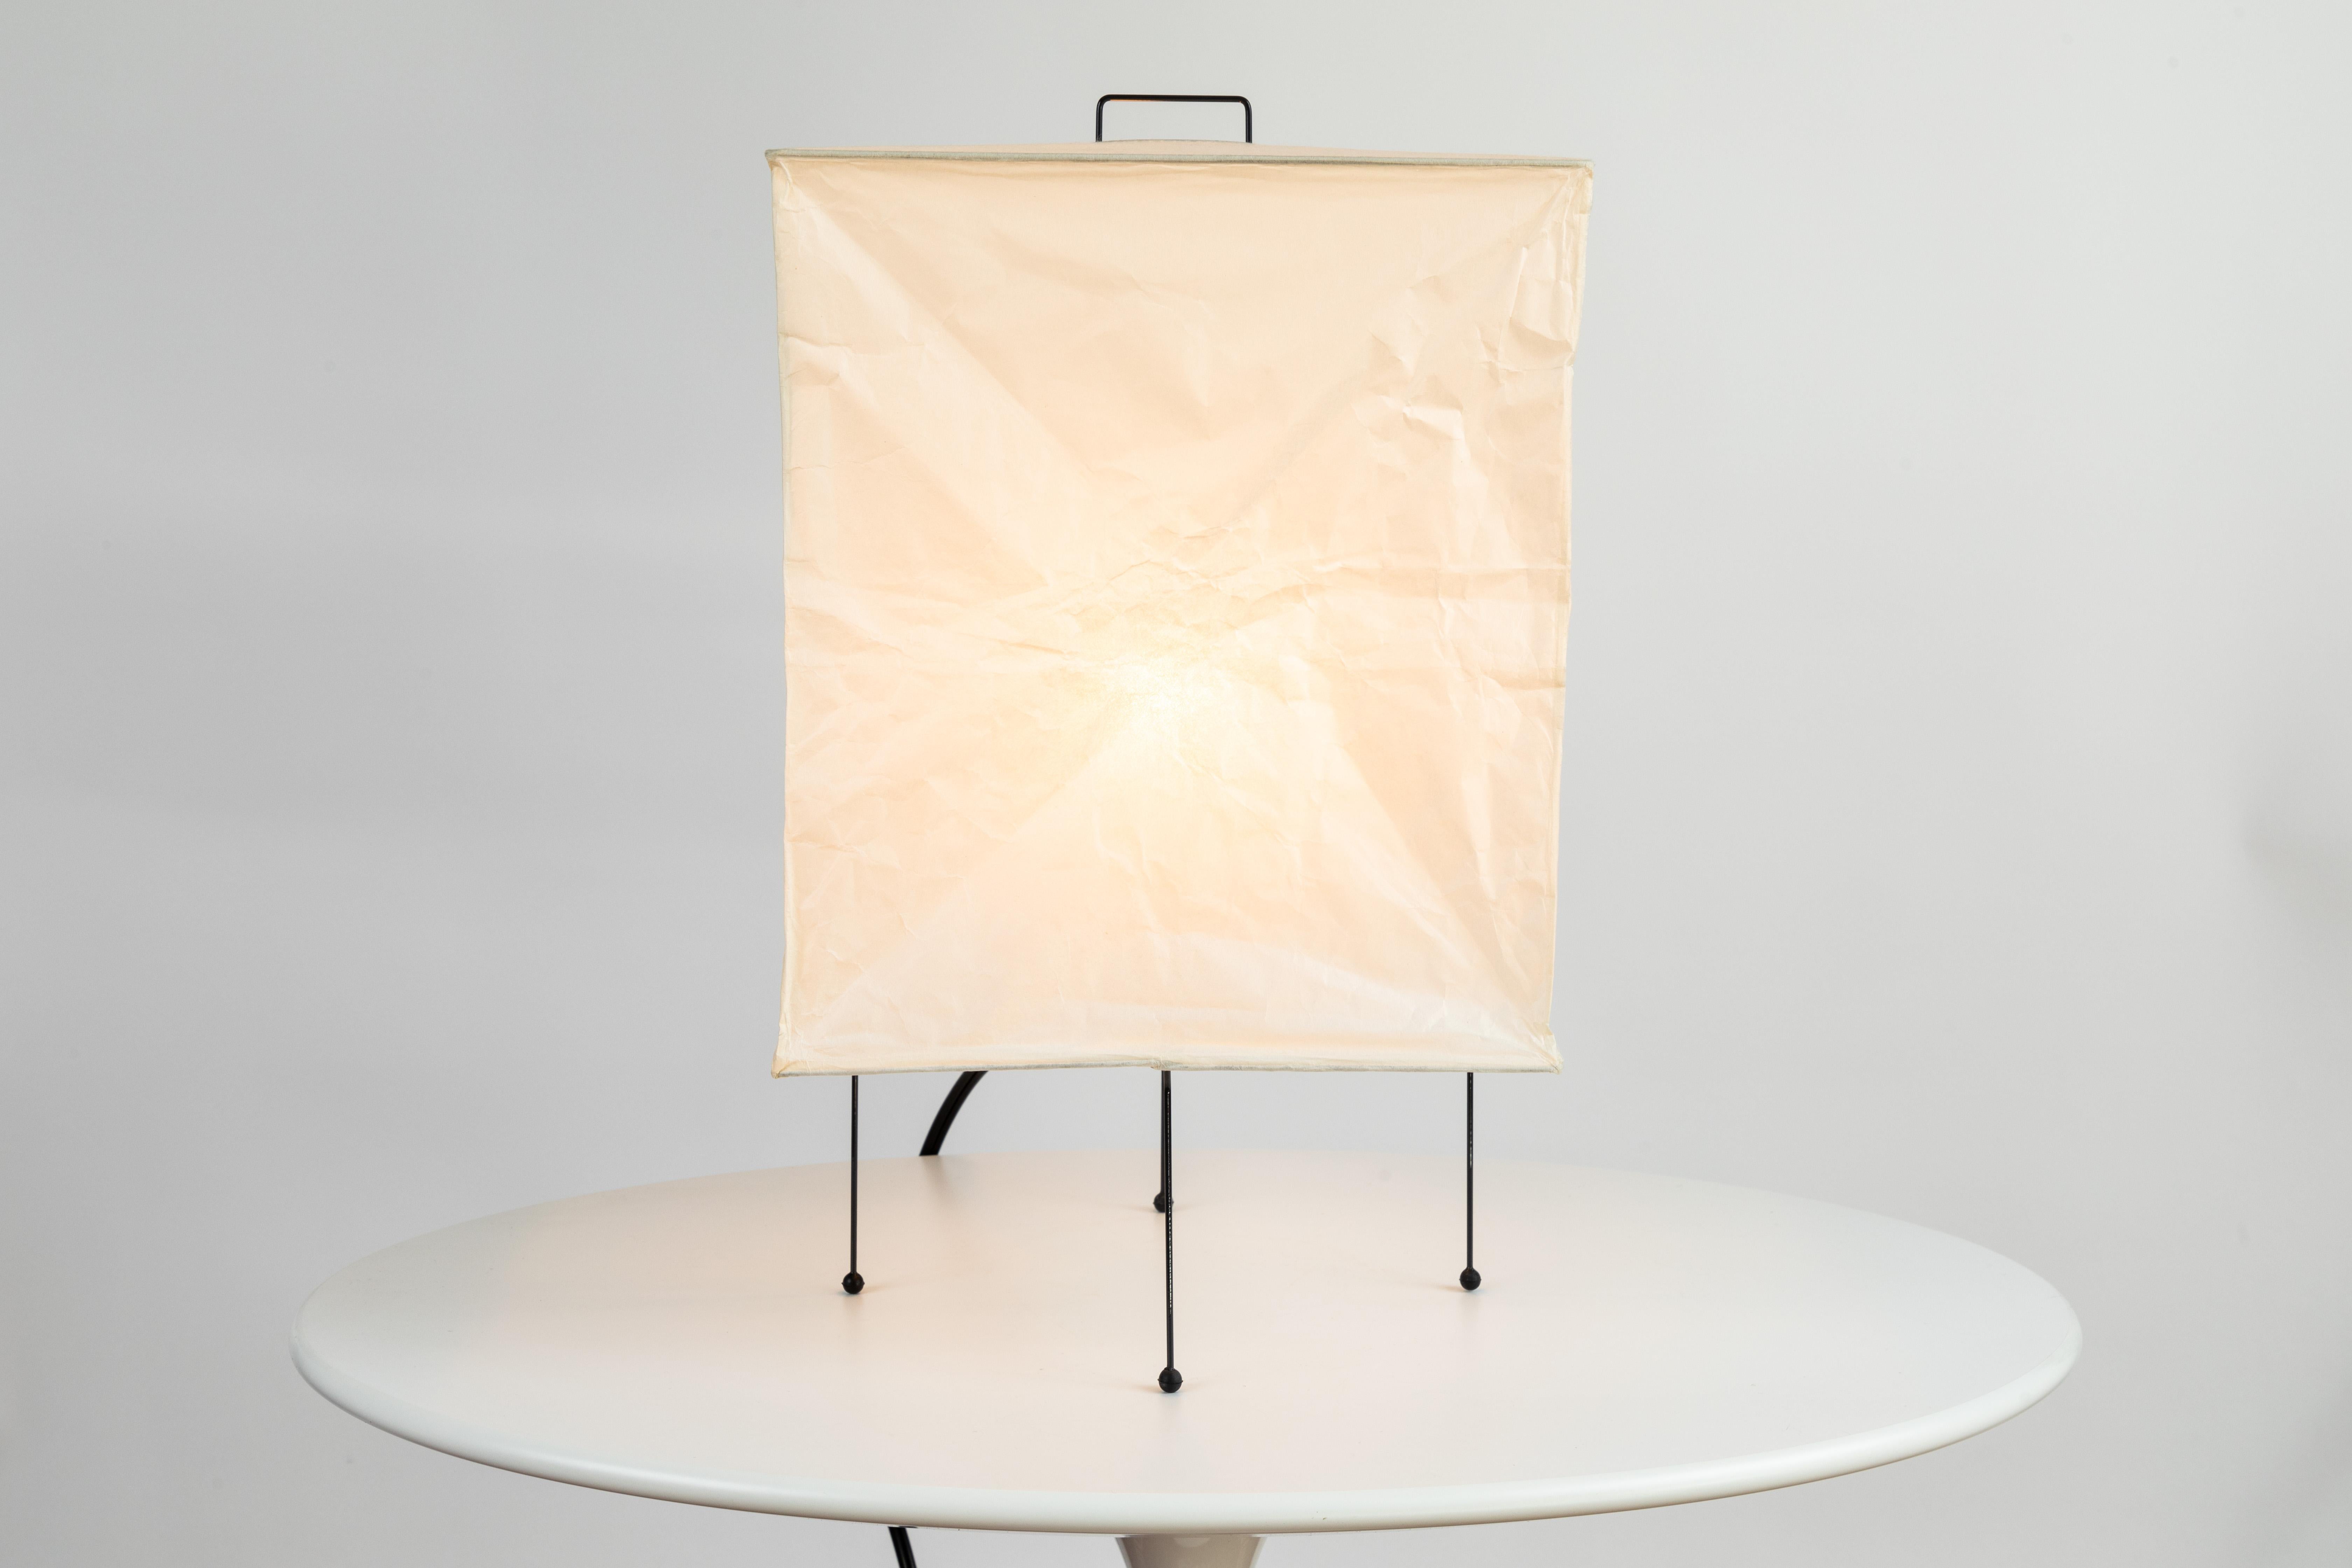 Akari model XP1 light sculpture by Isamu Noguchi. The shade is made from handmade washi paper and bamboo ribs with Noguchi Akari manufacturer's stamp. Akari light sculptures by Isamu Noguchi are considered icons of 1950s modern design. Designed by